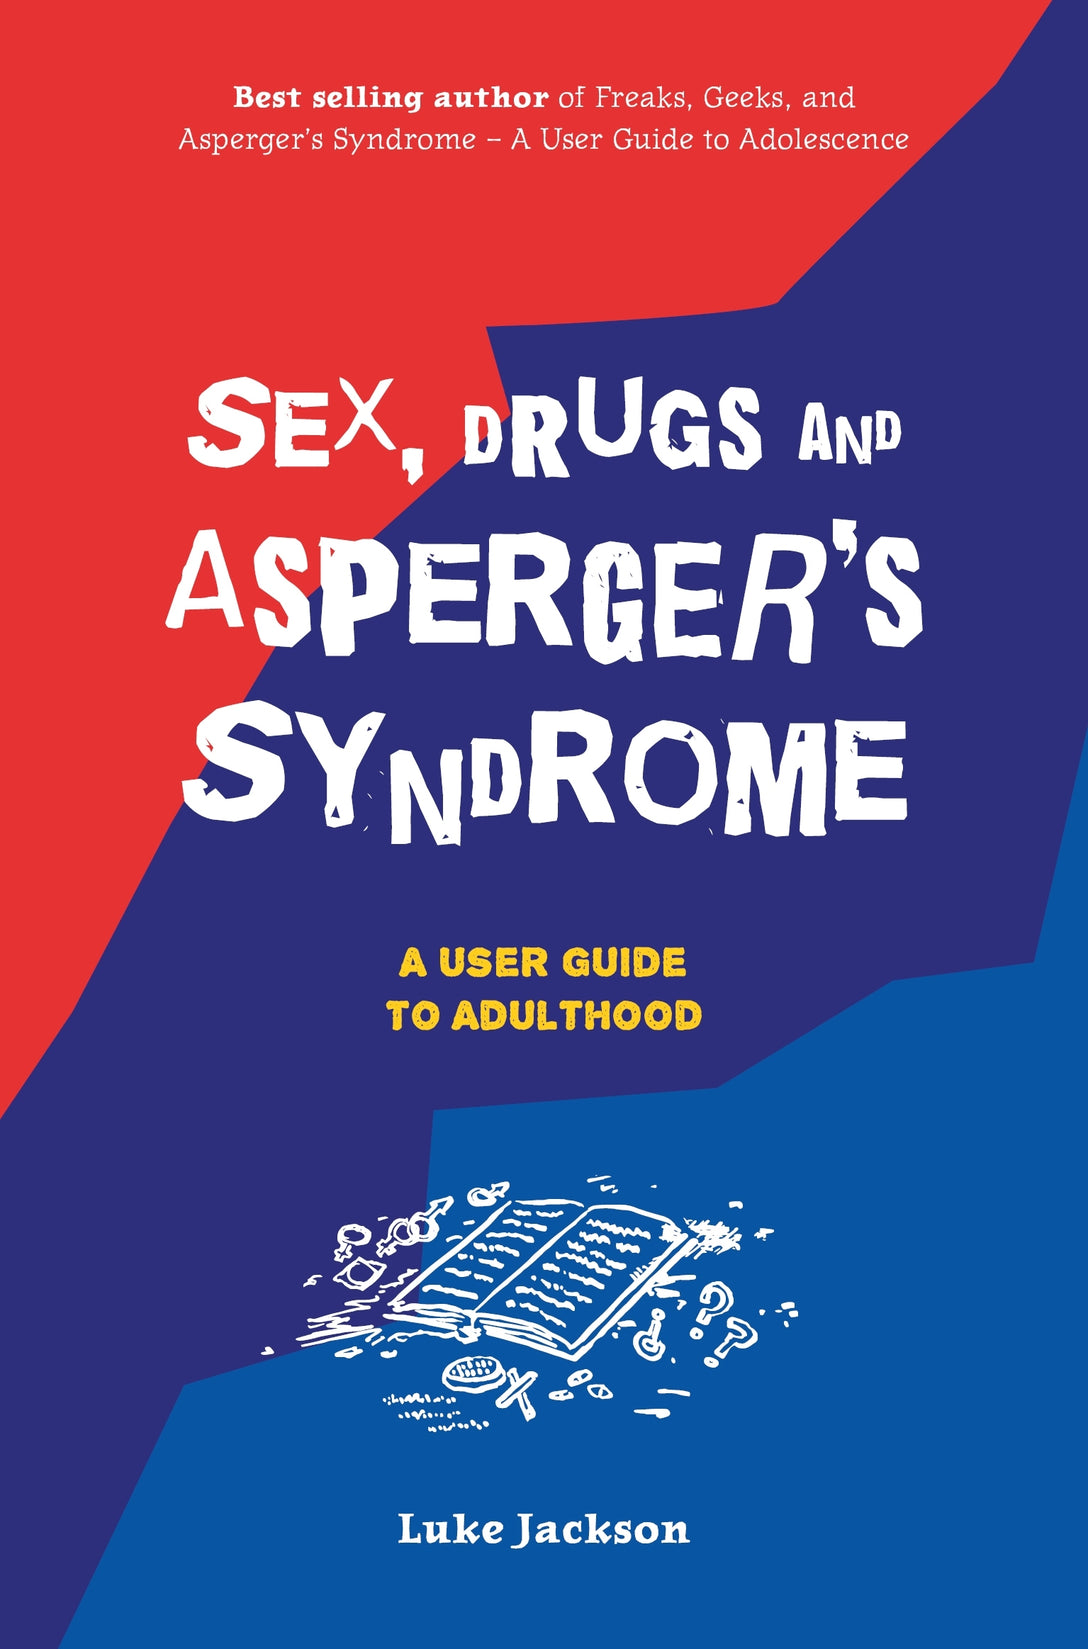 Sex, Drugs and Asperger's Syndrome (ASD) by Luke Jackson, Dr Anthony Attwood